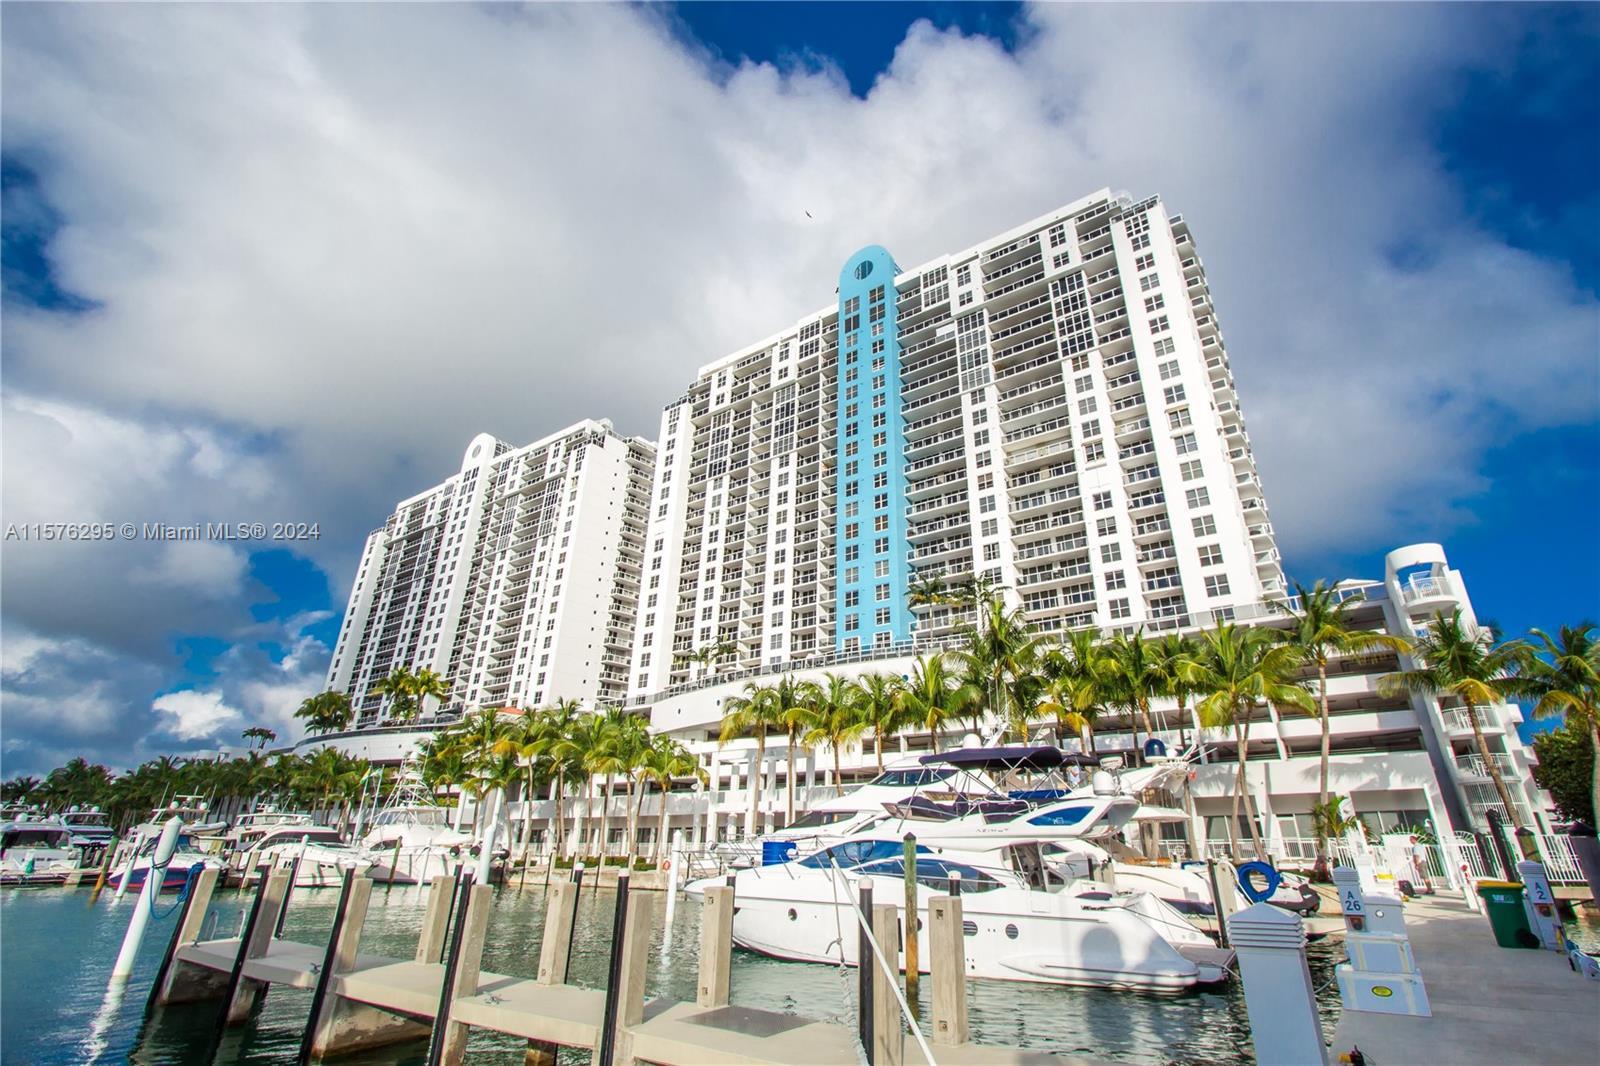 Photo of 1800 Sunset Harbour Dr #1605 in Miami Beach, FL